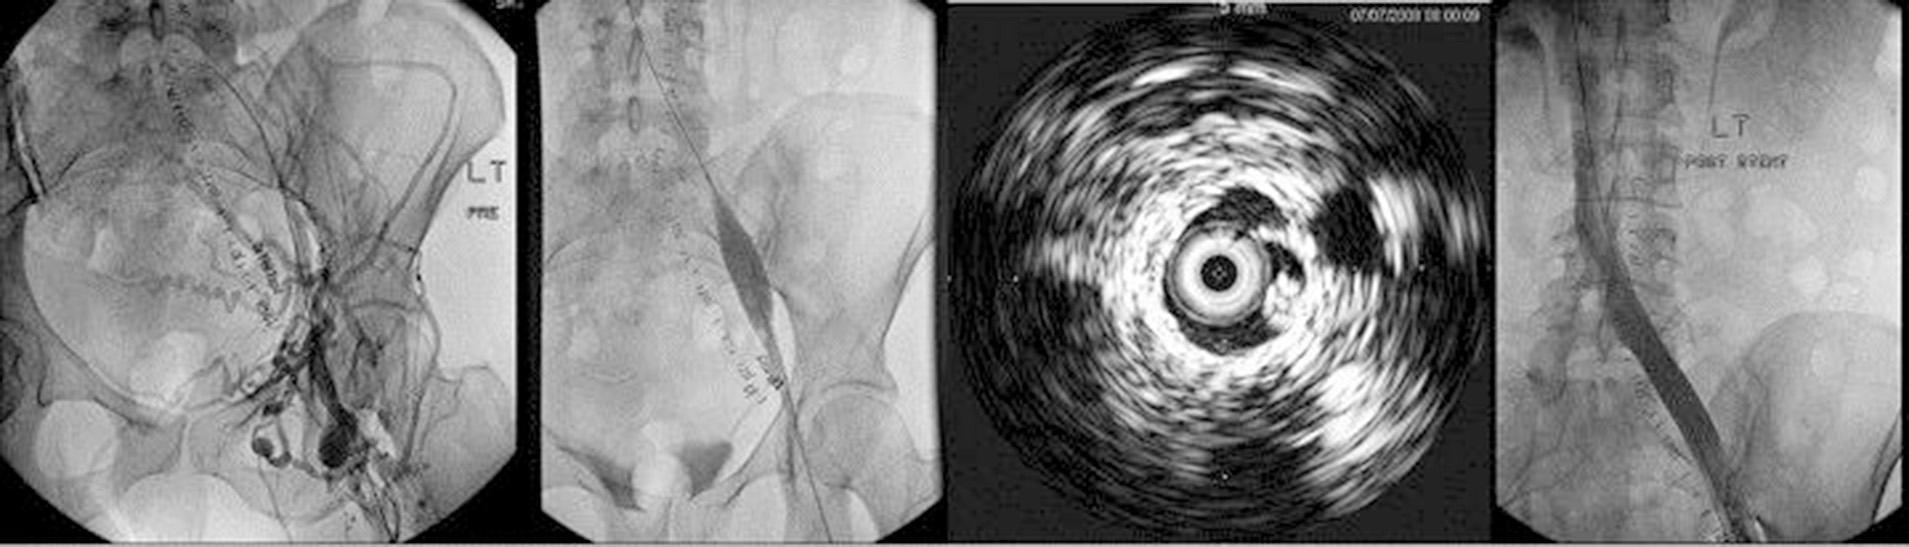 Fig. 18.10, Recanalization of an occluded iliac vein. Left panel, initial venogram. Second panel, aggressive dilatation of the occluded vein and deployment of a slightly oversized stent is required to achieve a recanalized lumen approximating normal anatomy. This poses no bleeding risk. Third panel, intravascular ultrasound examination of the recanalized channel after maximal balloon dilatation invariably shows the glide wire in the middle of the venous channel with intact thick walls. Right panel, completion venogram shows a stented channel of adequate lumen without residual stenoses, good flow, and absence of previously visualized collaterals. 15